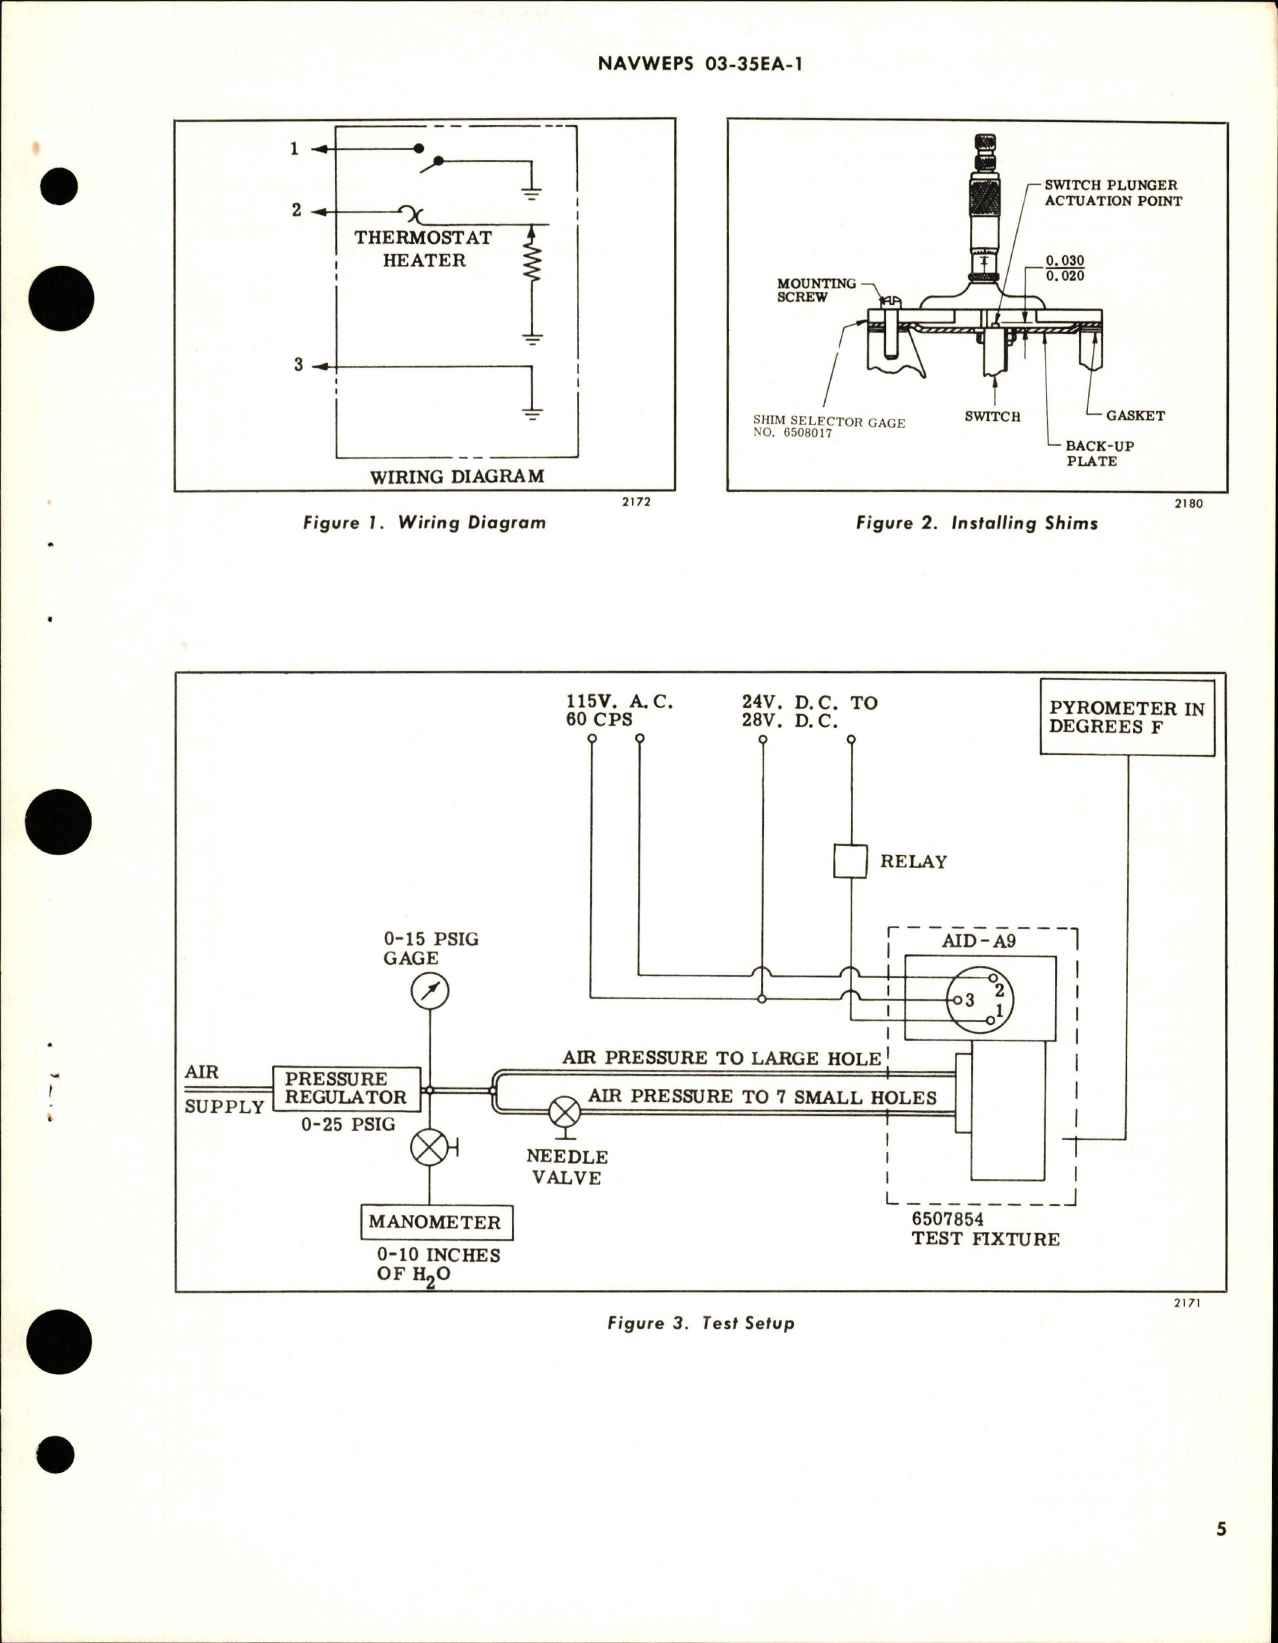 Sample page 5 from AirCorps Library document: Overhaul Instructions with Parts Breakdown for Ice Detector - Part 6506331 - Model AID-A9